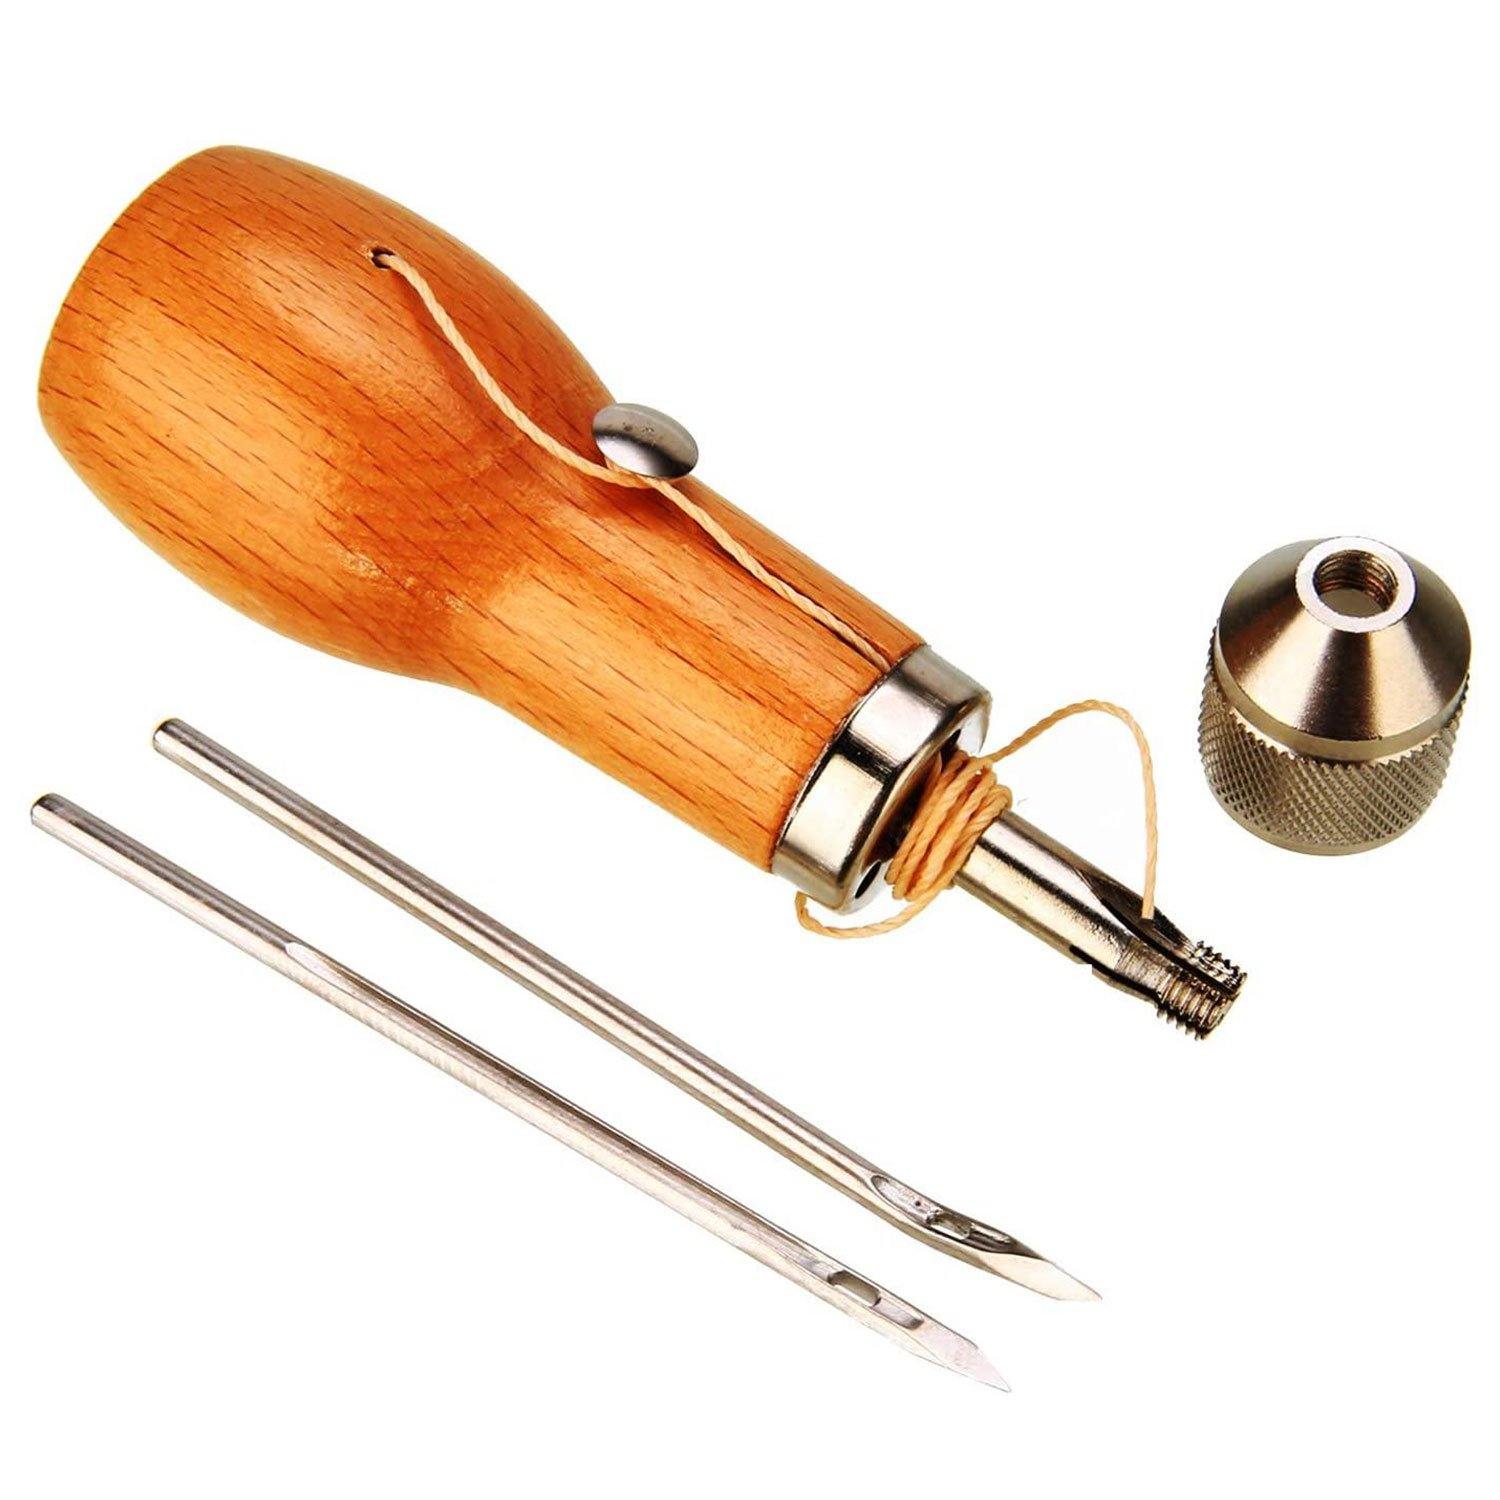 JC Performance Leather Sewing Awl Quick Stitch Repair Tool Set Heavy Duty Thread (Without Awl, Dark Brown)